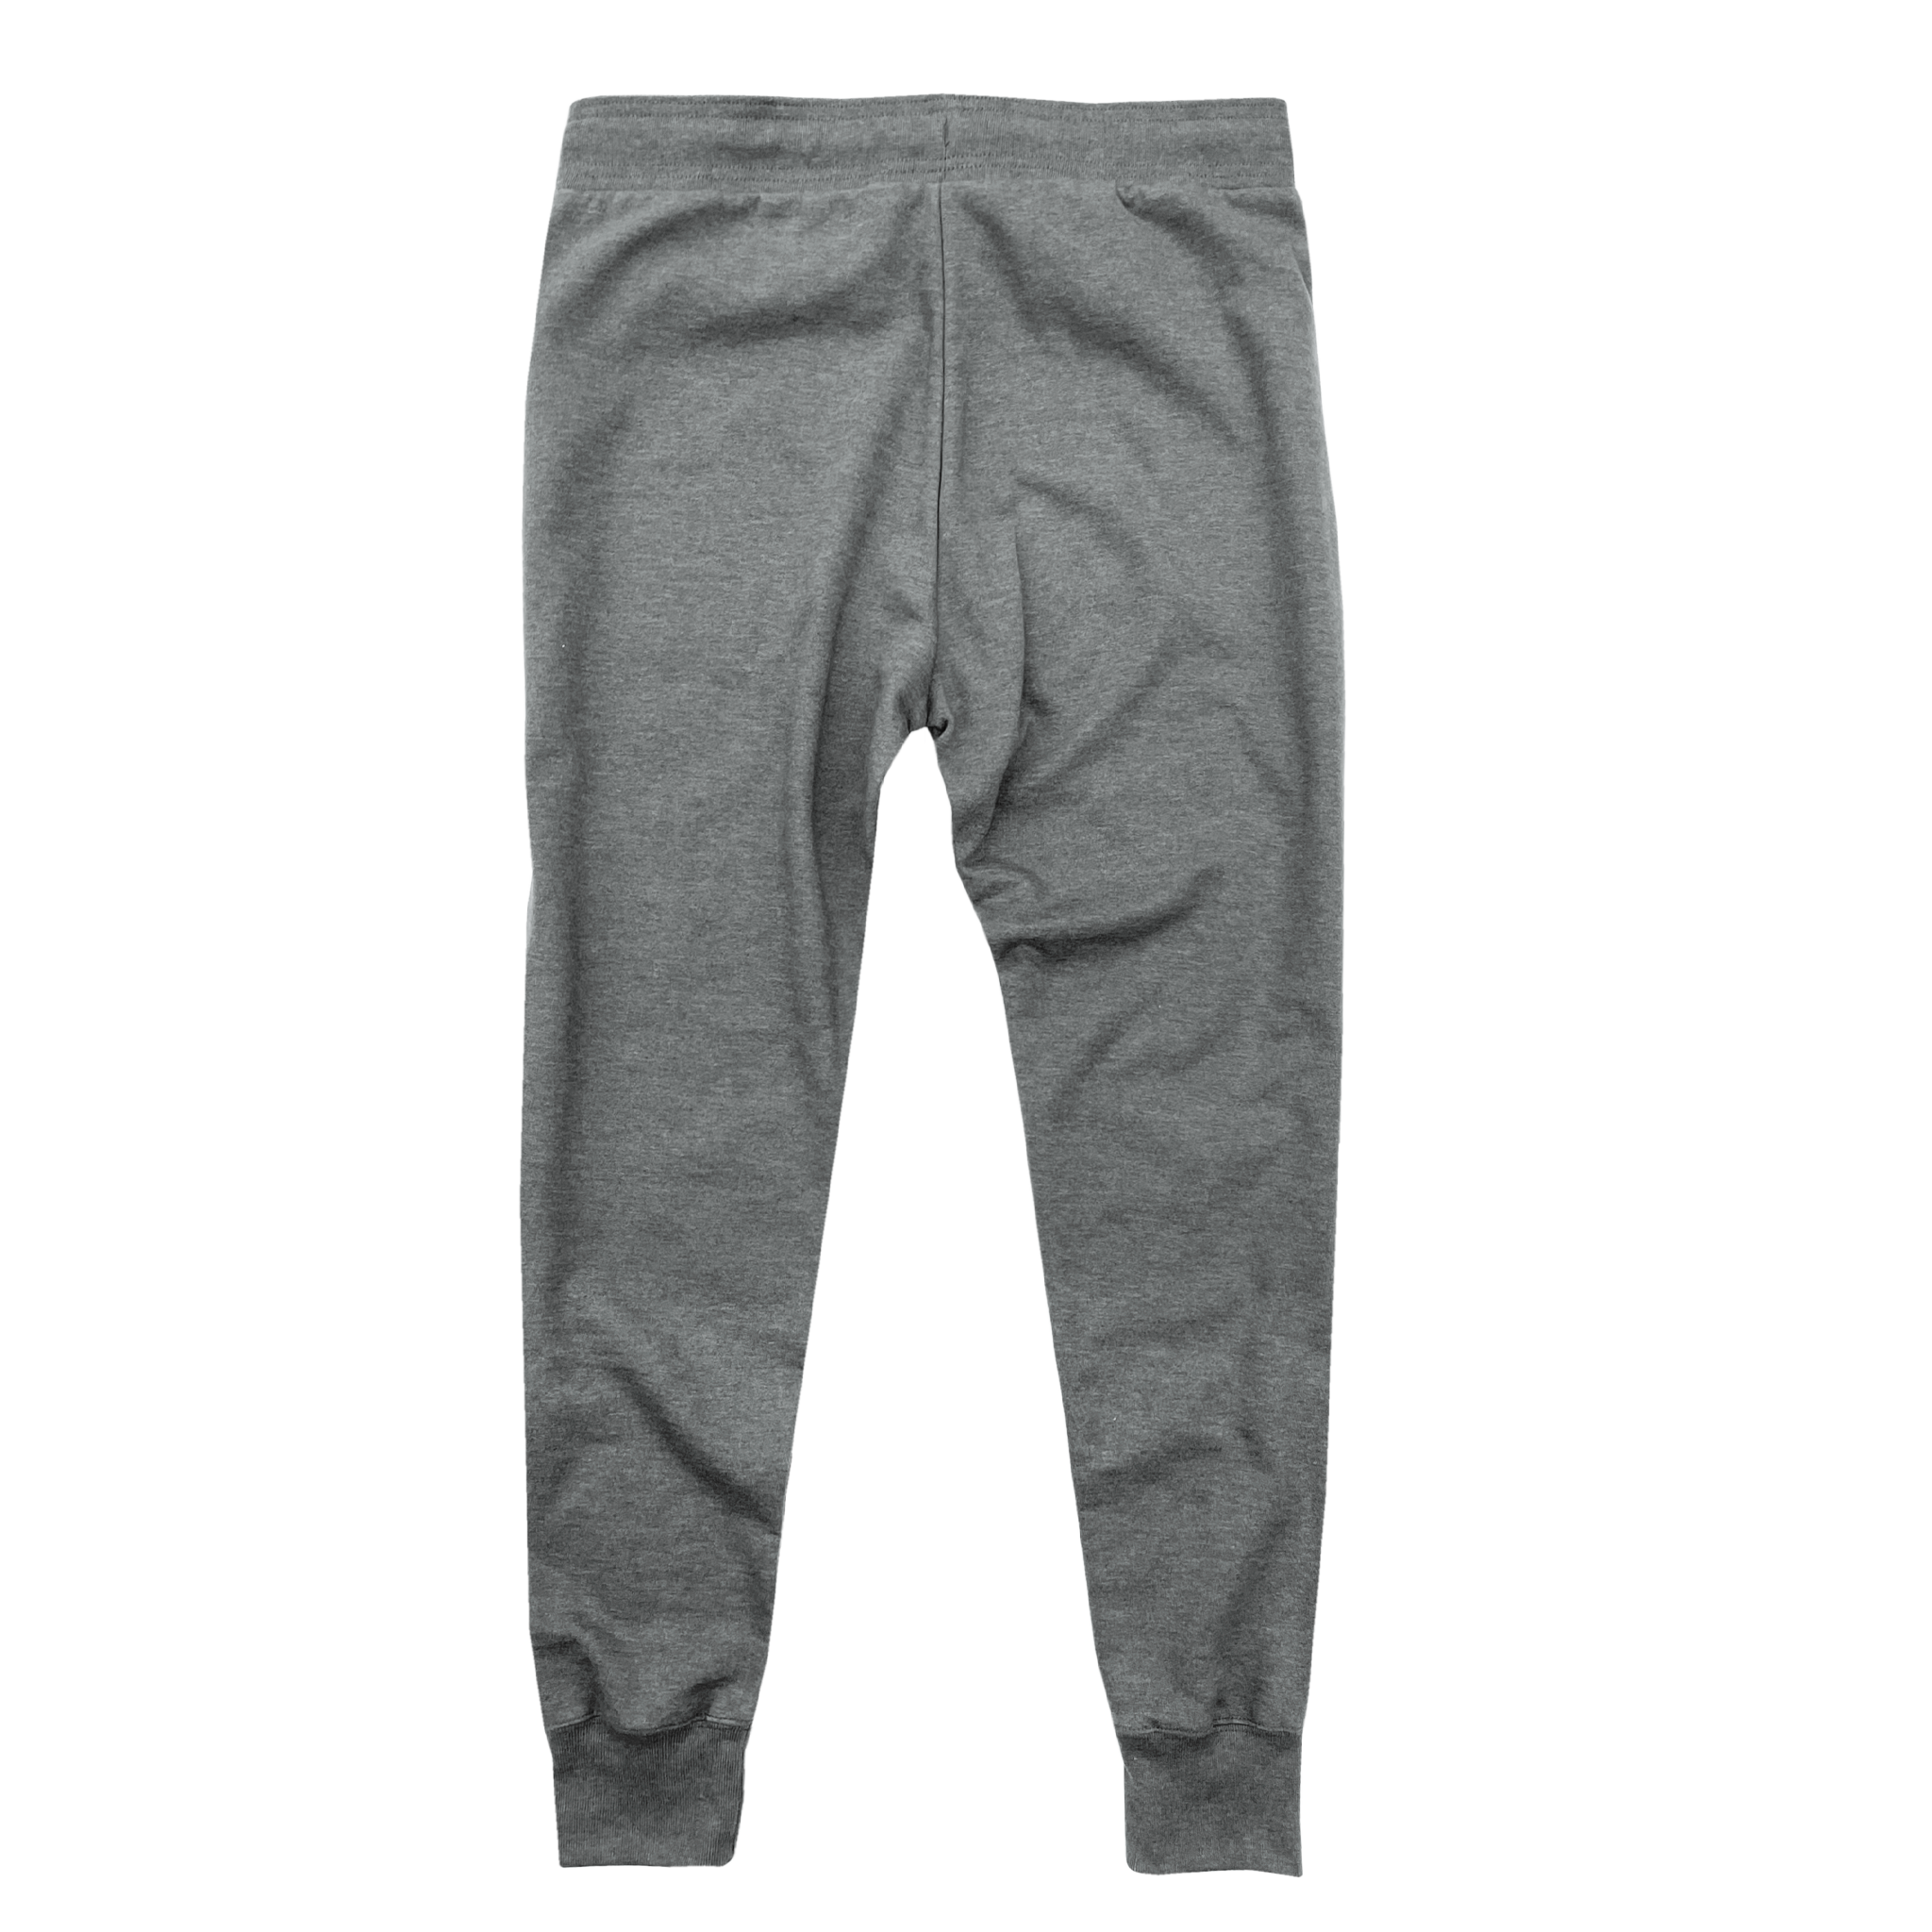 Back Flat Lay GOEX Unisex and Men's Fleece Jogger in Heather Grey